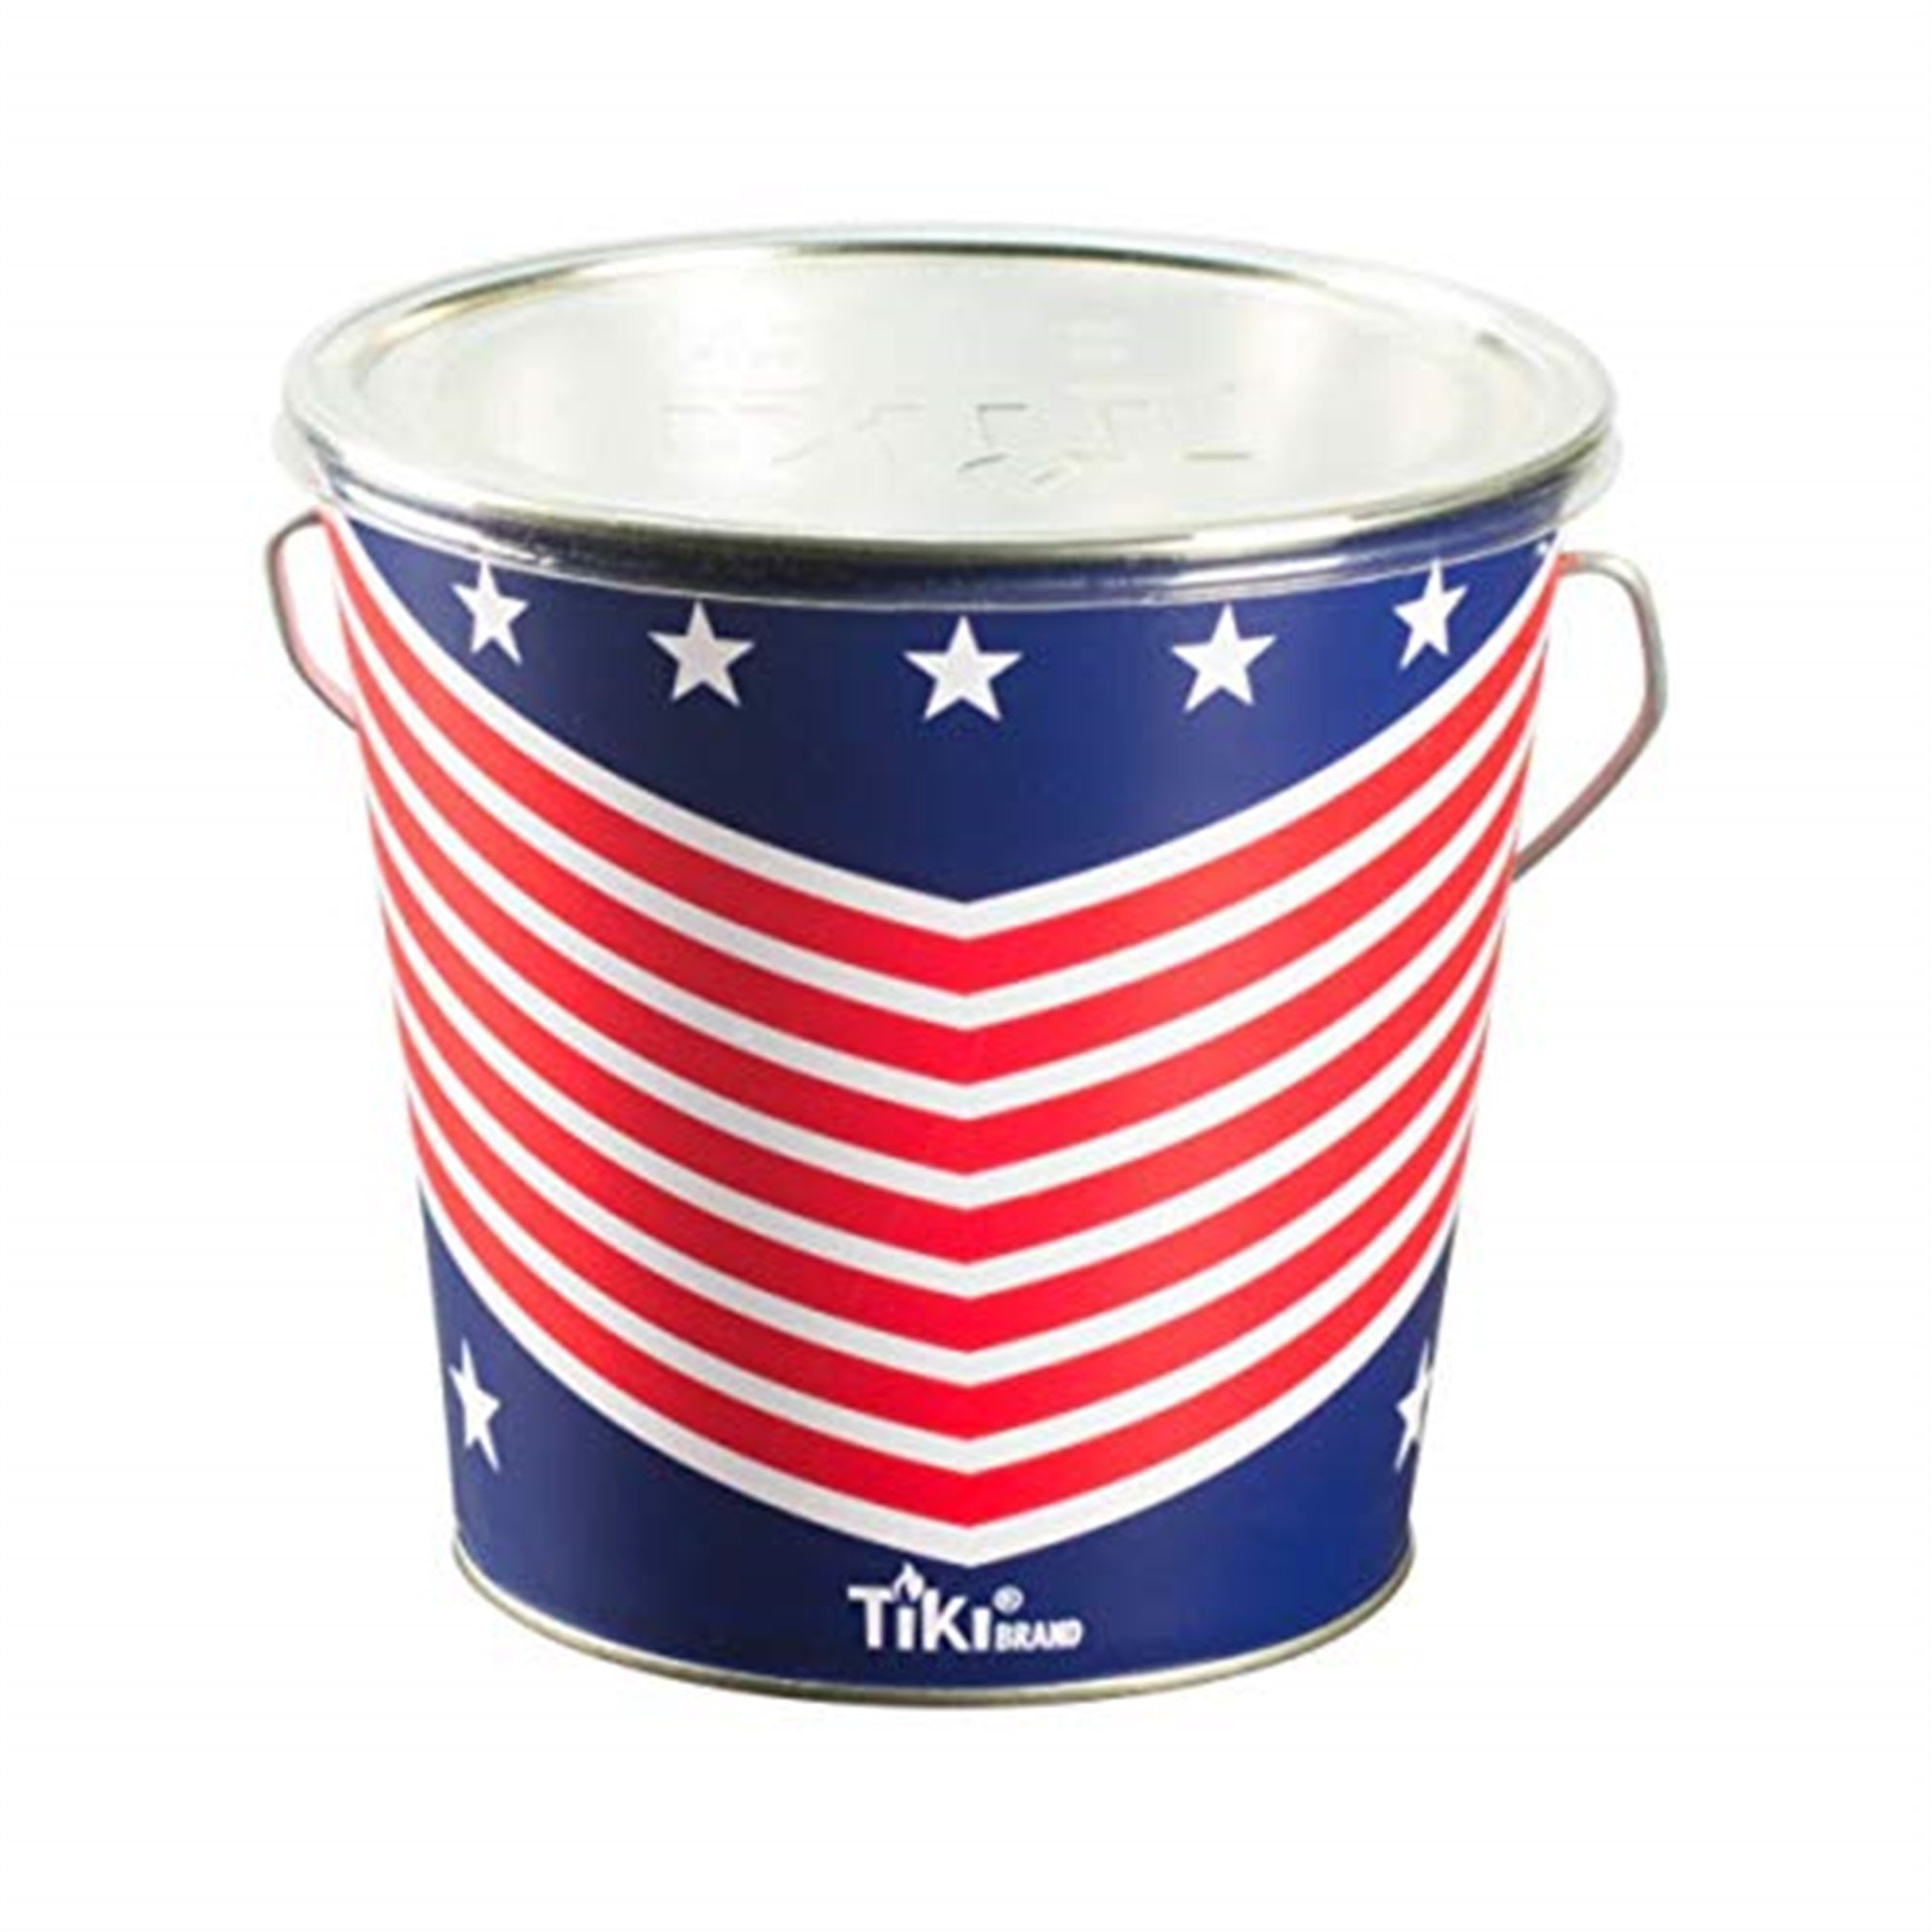 TIKI Brand BiteFighter Citronella Wax Candle Metal Bucket, 17 Ounce